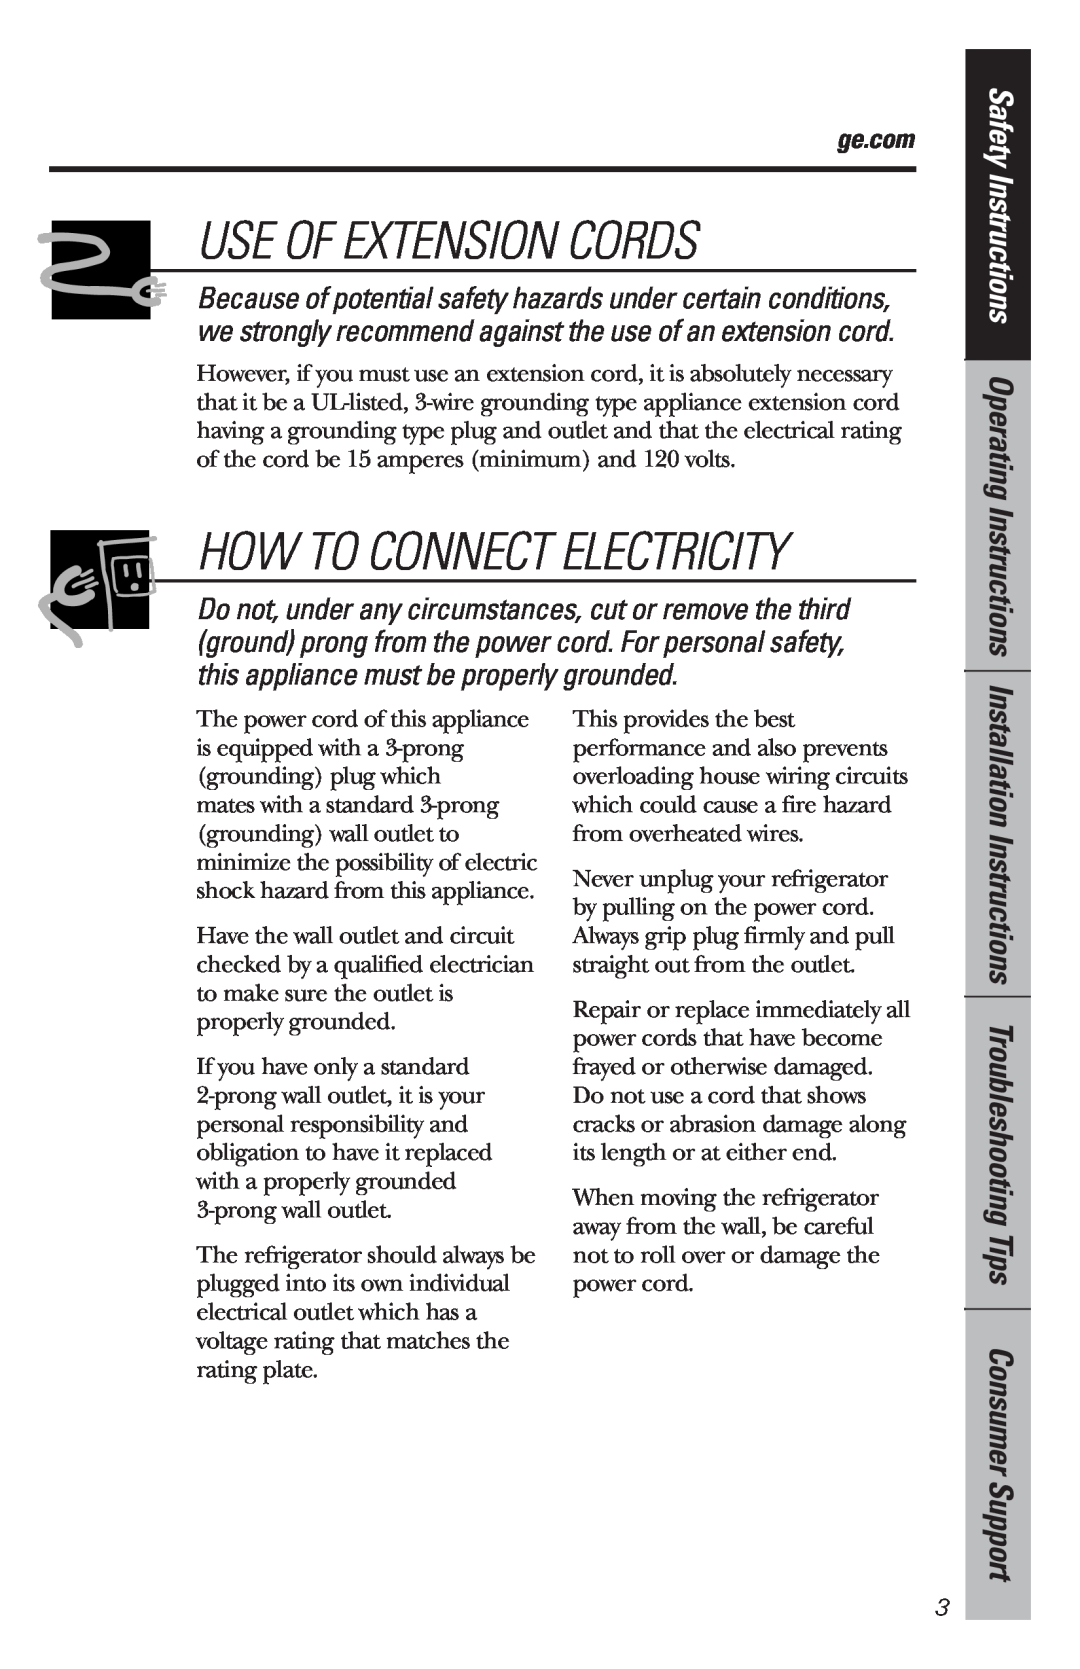 GE WMR04GAV Use Of Extension Cords, Safety Instructions Operating Instructions, ge.com, How To Connect Electricity 